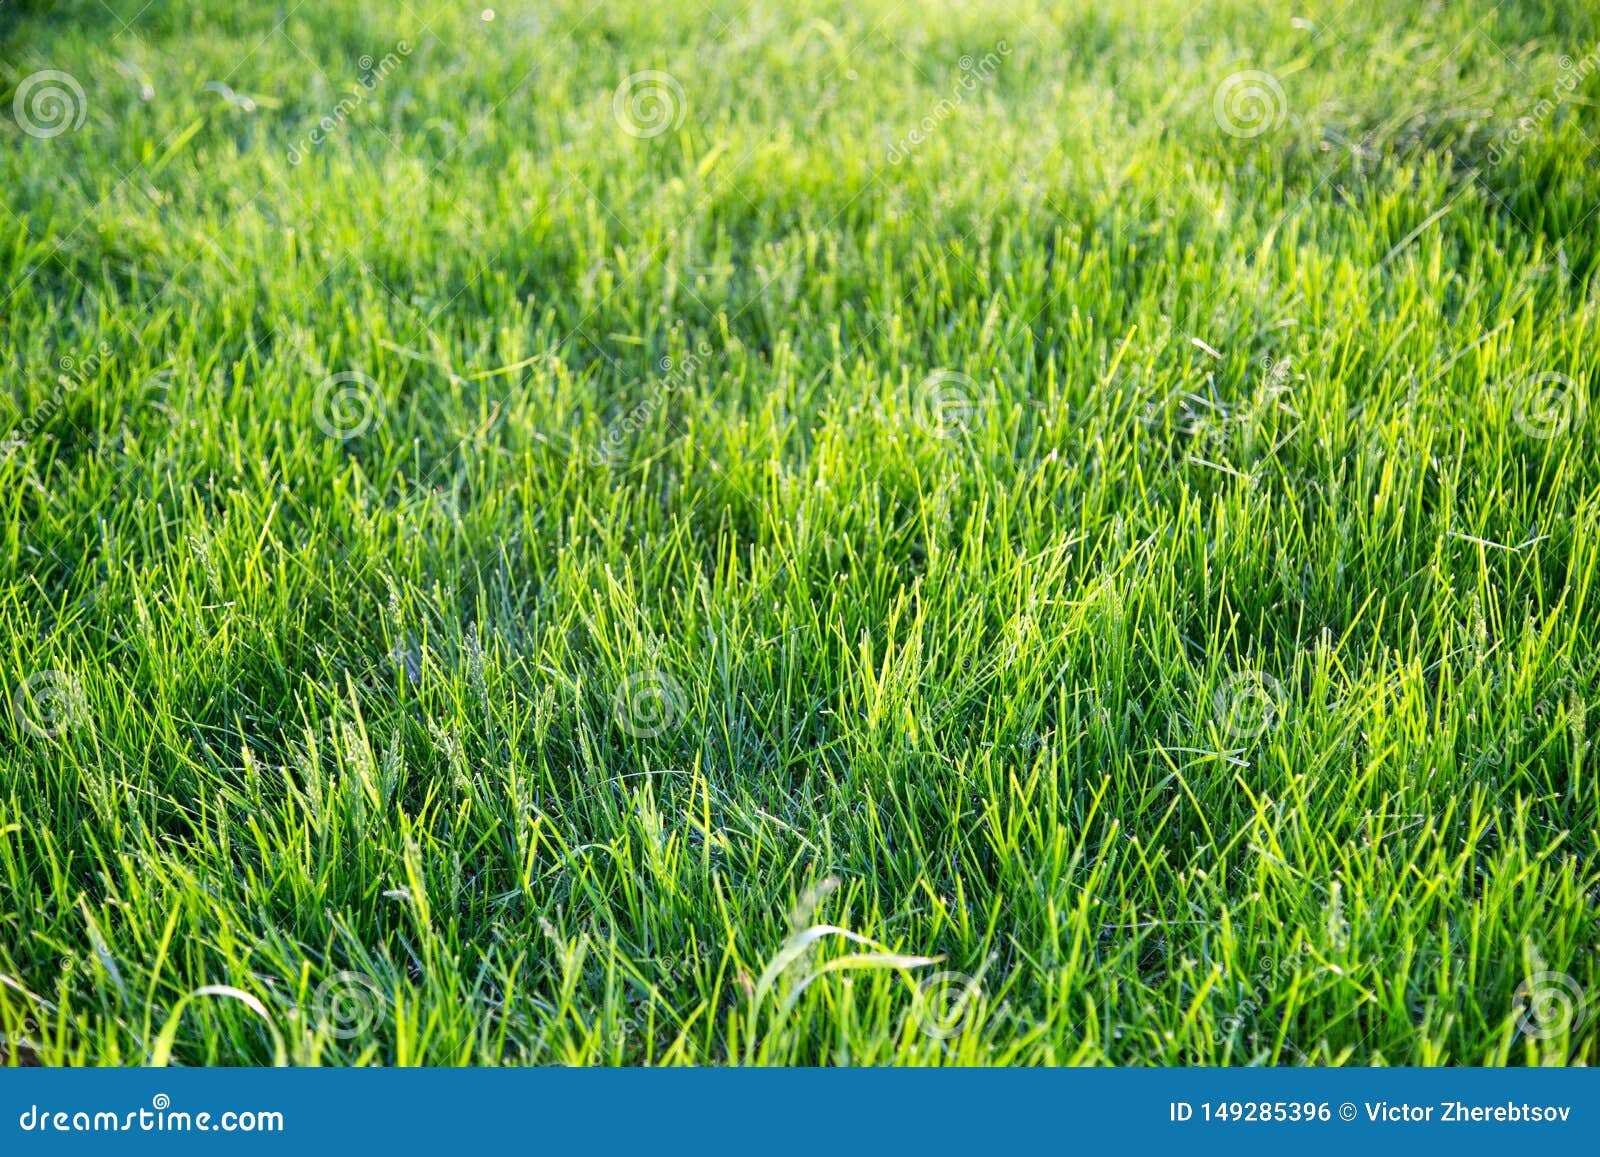 Background of Bright Green Grass in the Rays of the Setting Sun in Spring.  Selective Focus Stock Photo - Image of focus, field: 149285396